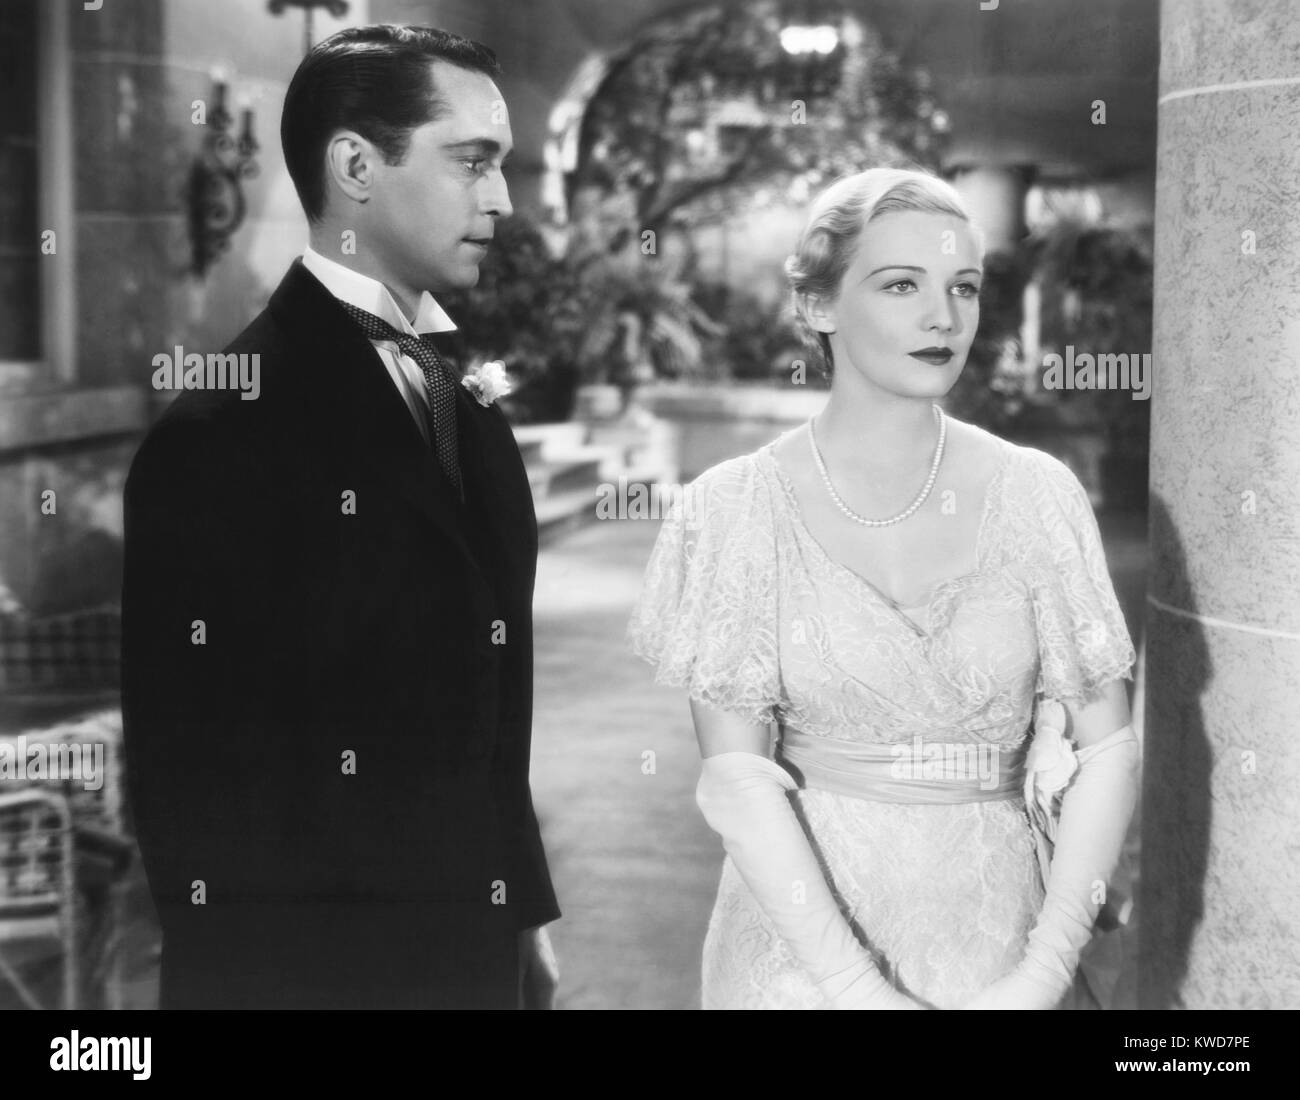 THE WORLD MOVES ON, from left: Franchot Tone, Madeleine Carroll, 1934. TM & Copyright ©20th Century Fox Film Corp. All rights reserved/courtesy Everett Collection Stock Photo